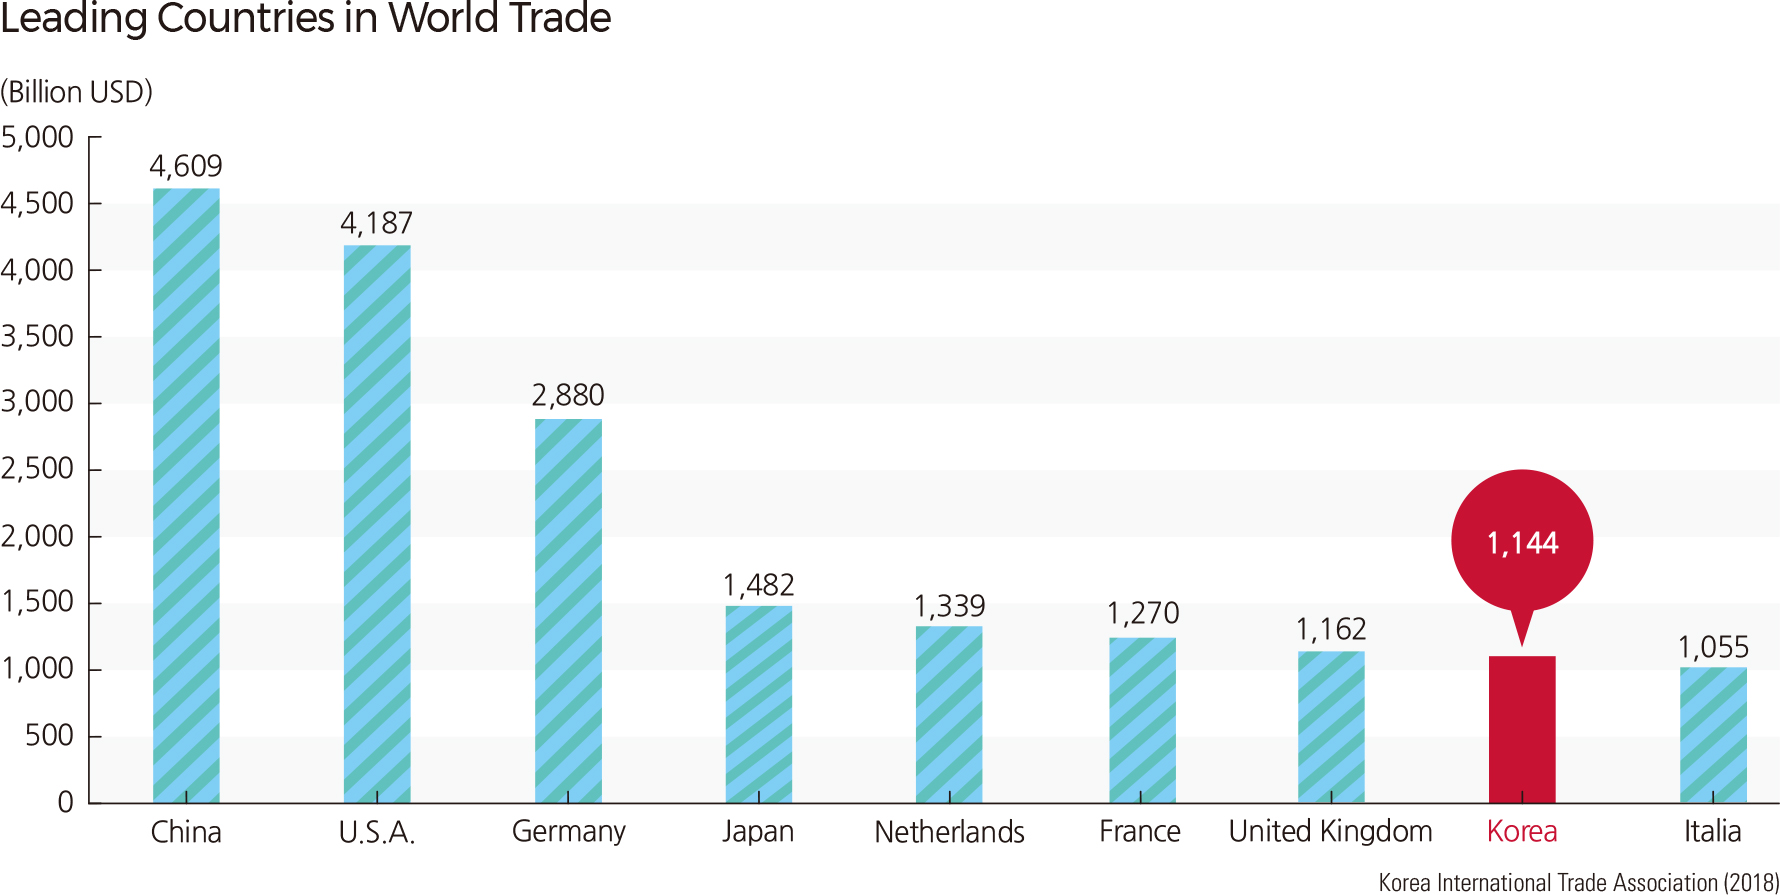 Leading Countries in World Trade